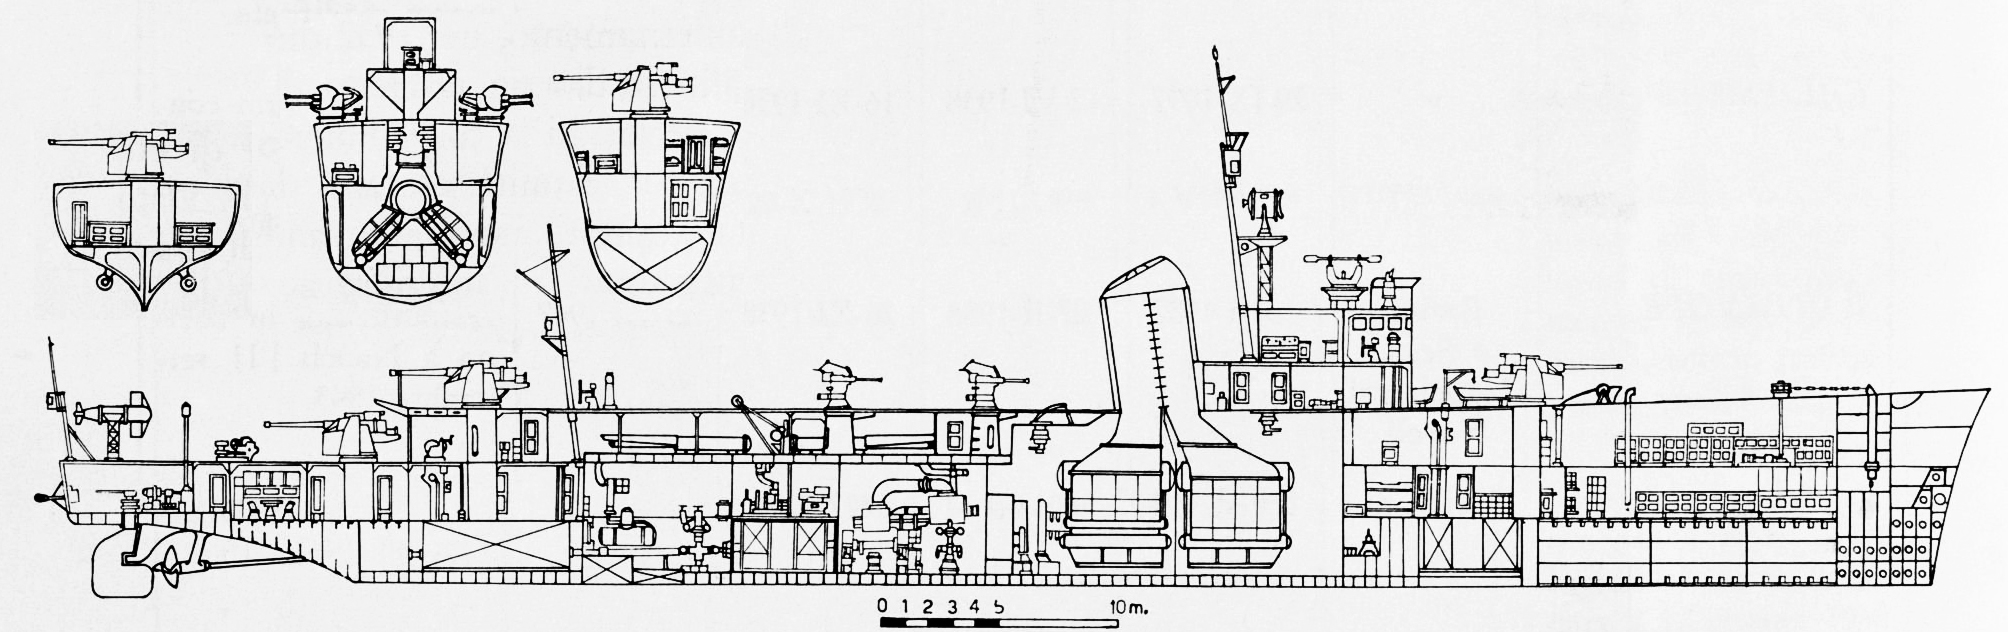 Cutaway of the Spica class